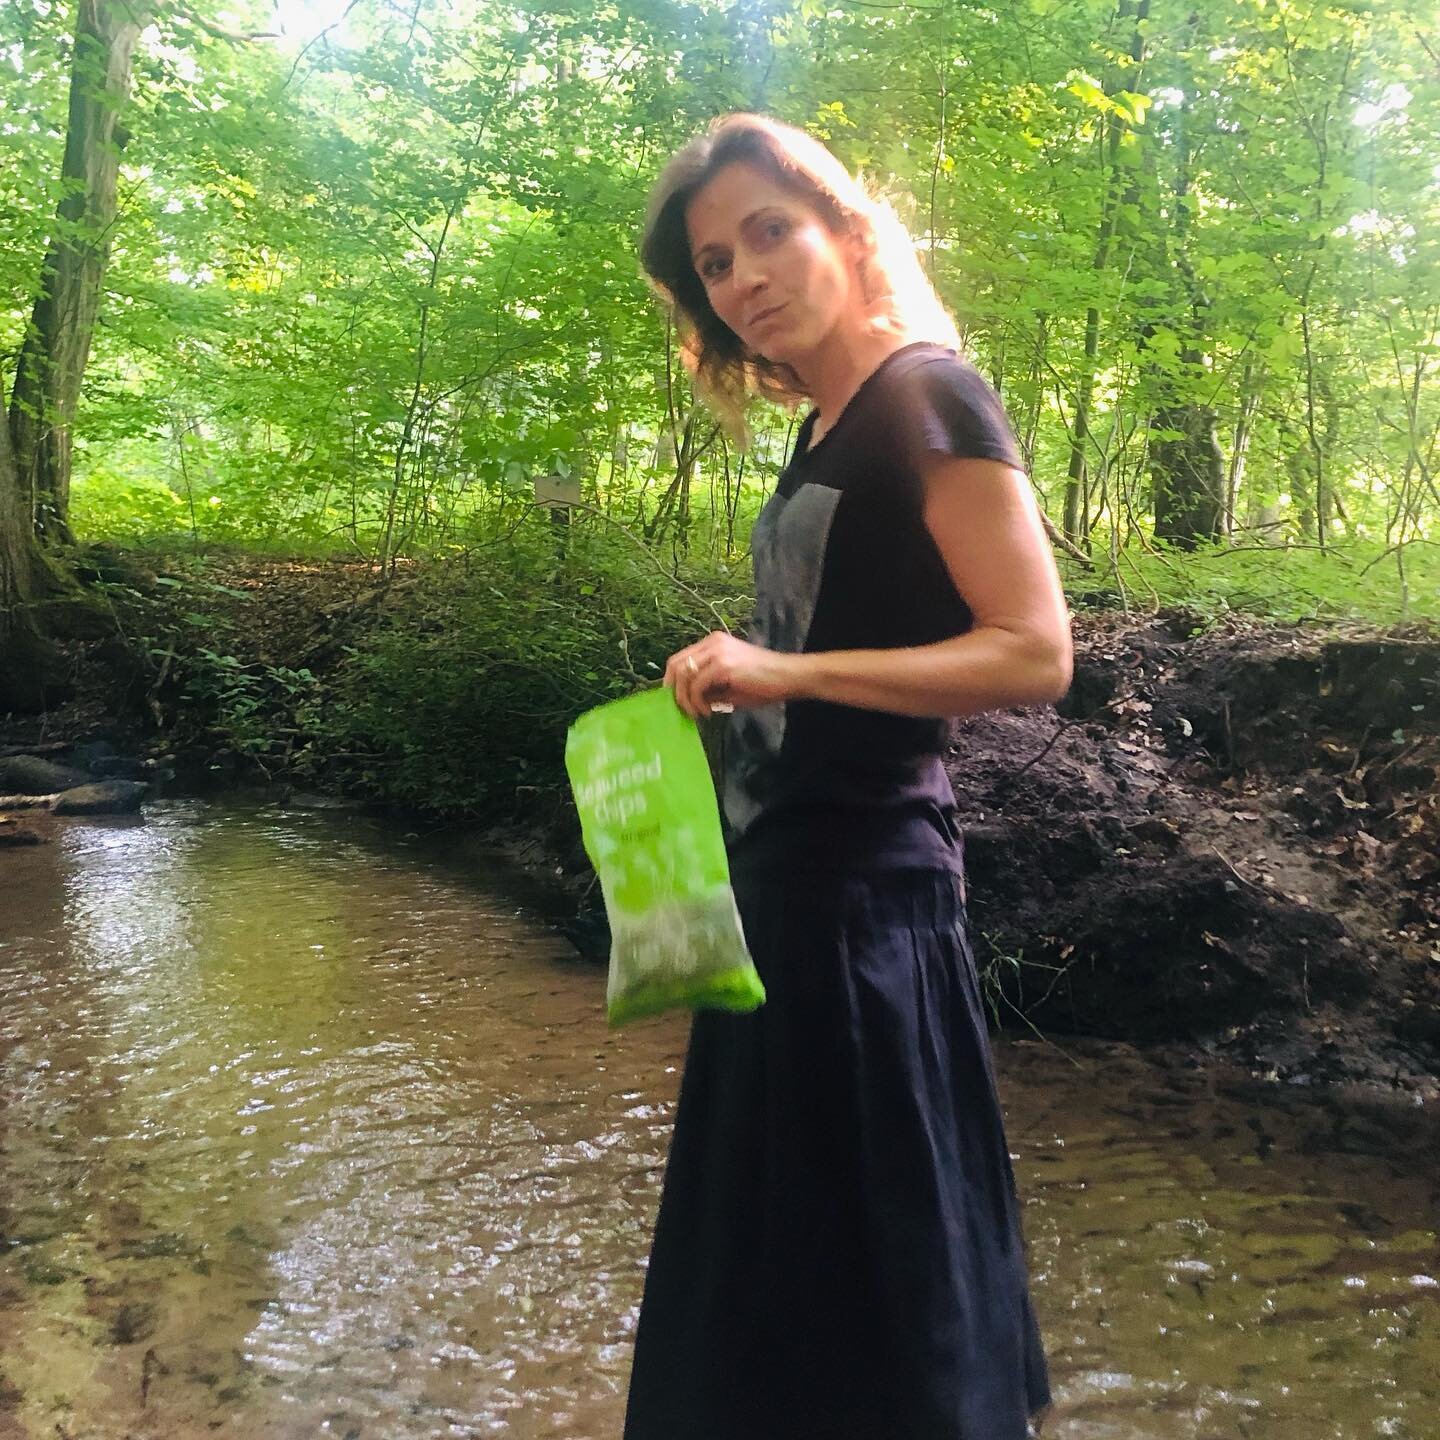 #lastnight we had a wonderful #picknick in the forest, close to a small stream and enjoyed some #iseachips #iseagreen from the Dutch brand @seamorefood 
We just combined it with some warm rice and easy raw food salads. Just swipe to see what we had o